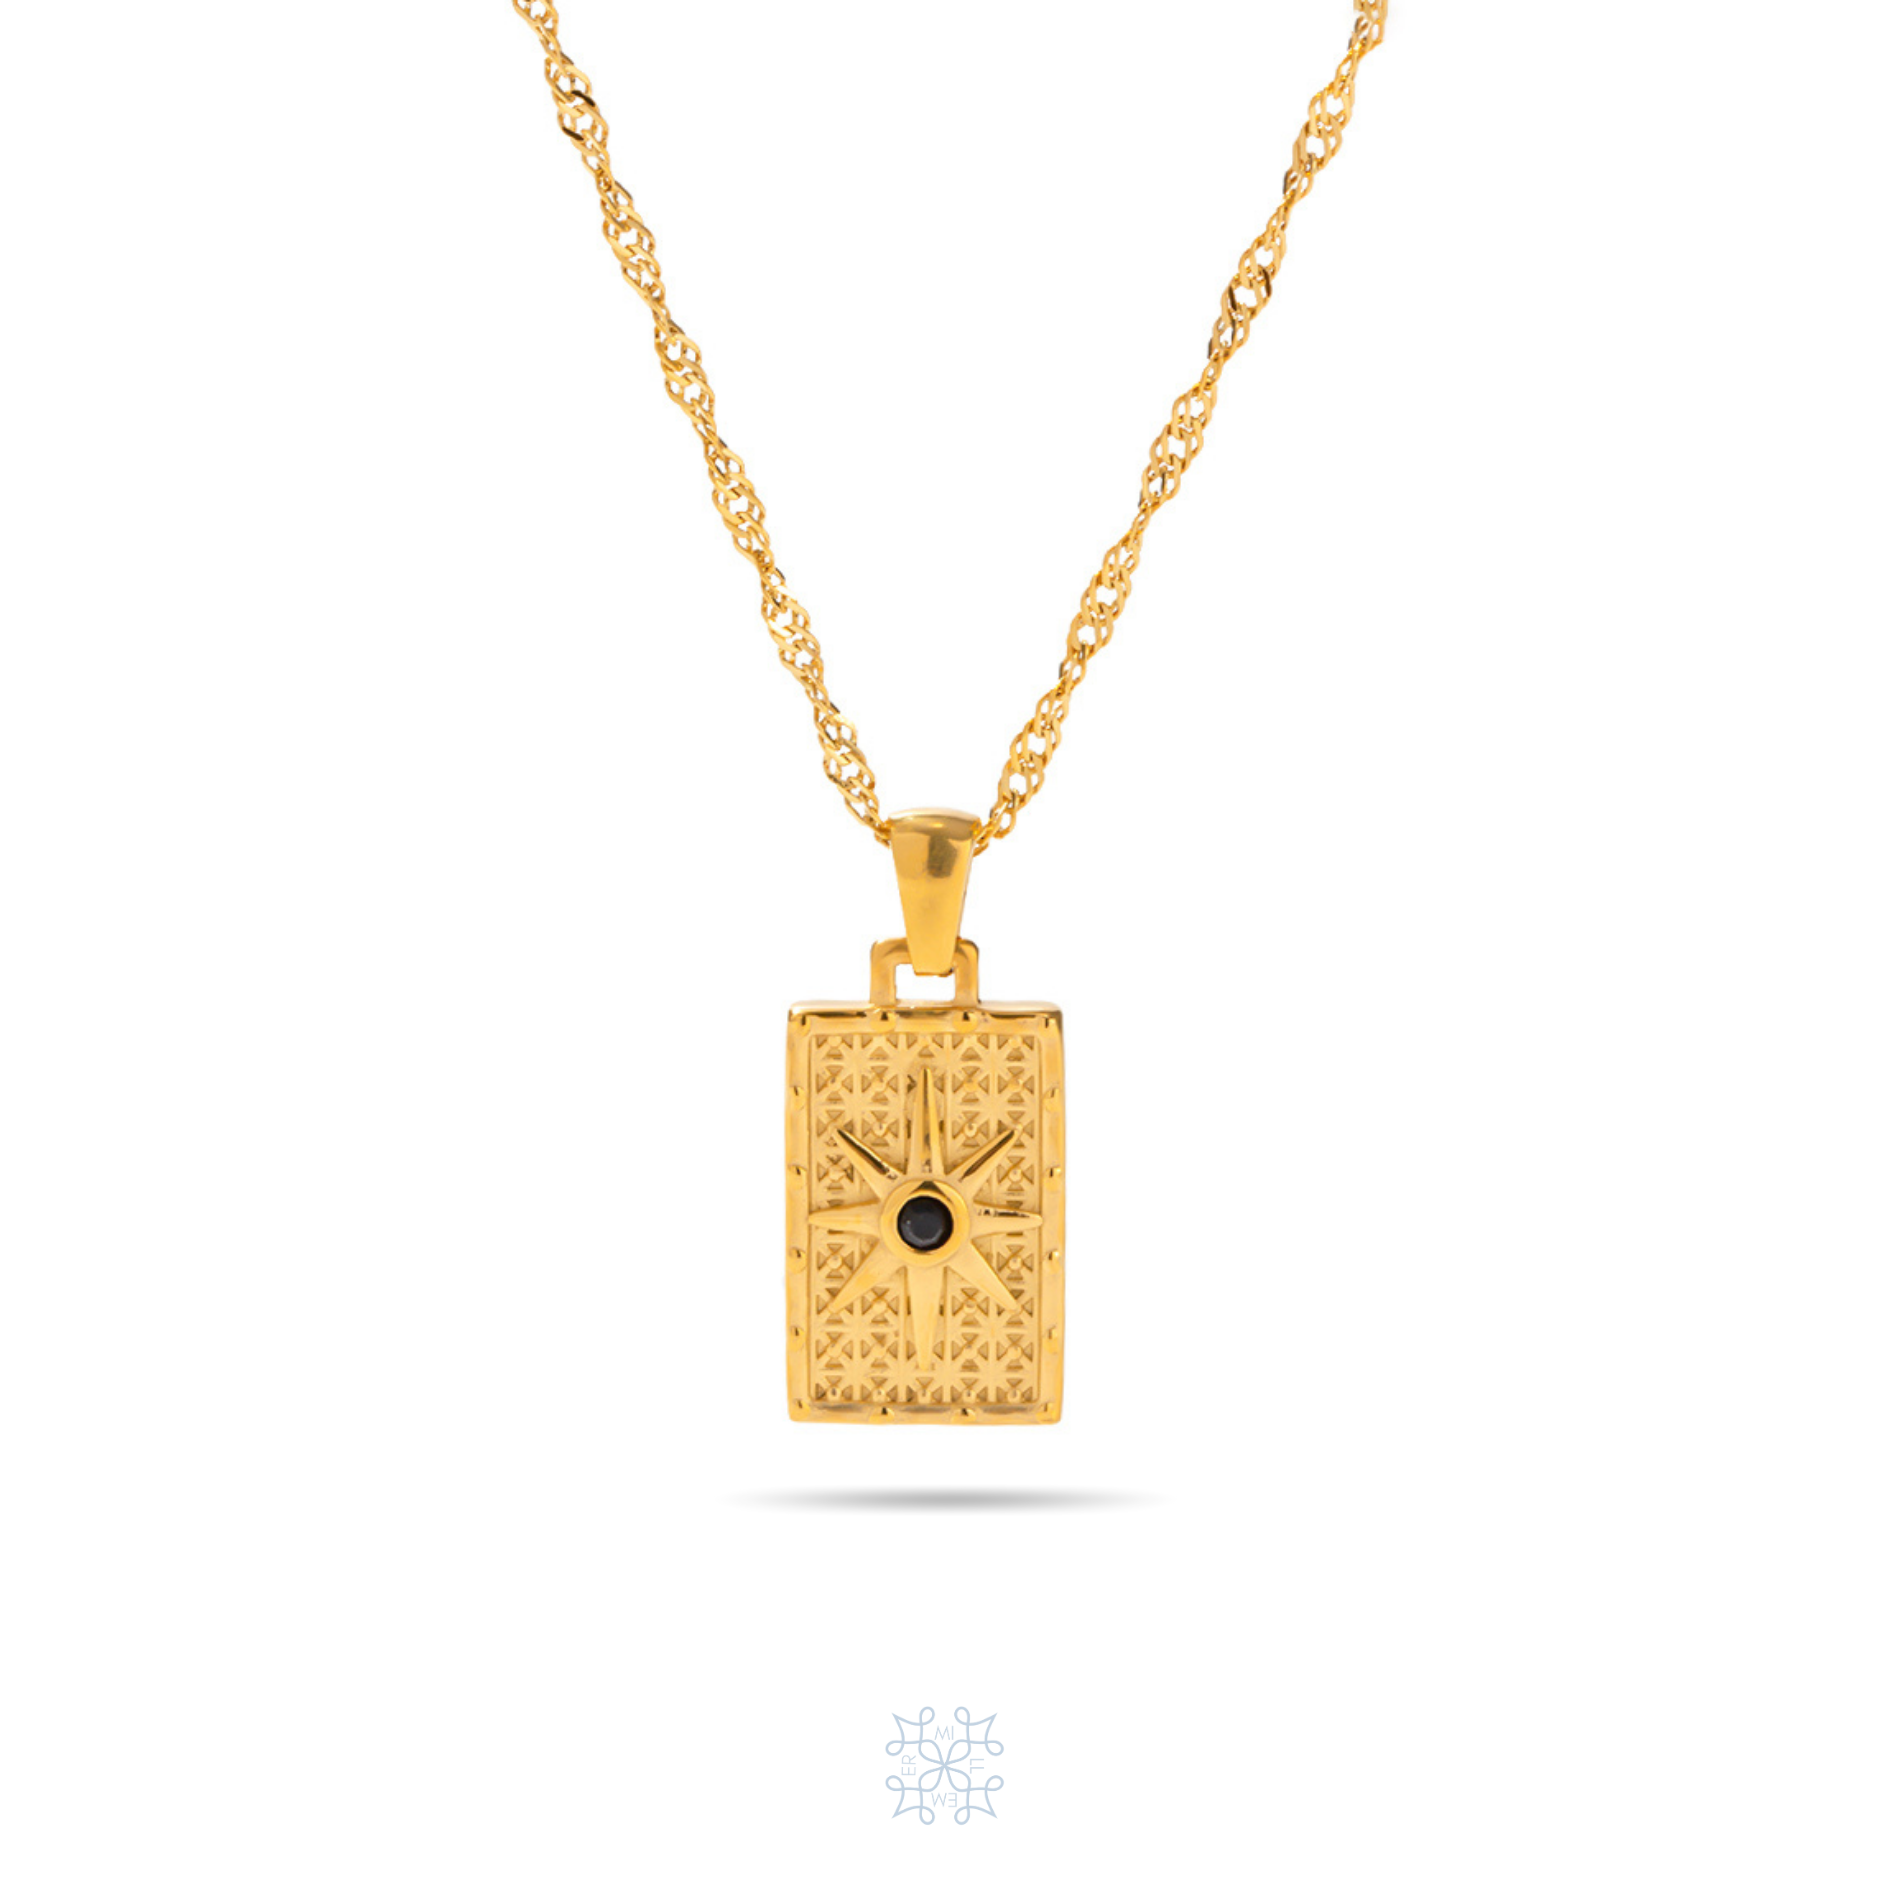 Rectangular compass Gold pendant. A star engraved in the top of the pendant with a black zircon in the middle. th ependant has the same design in both sides of ot. It has a long gold chain.